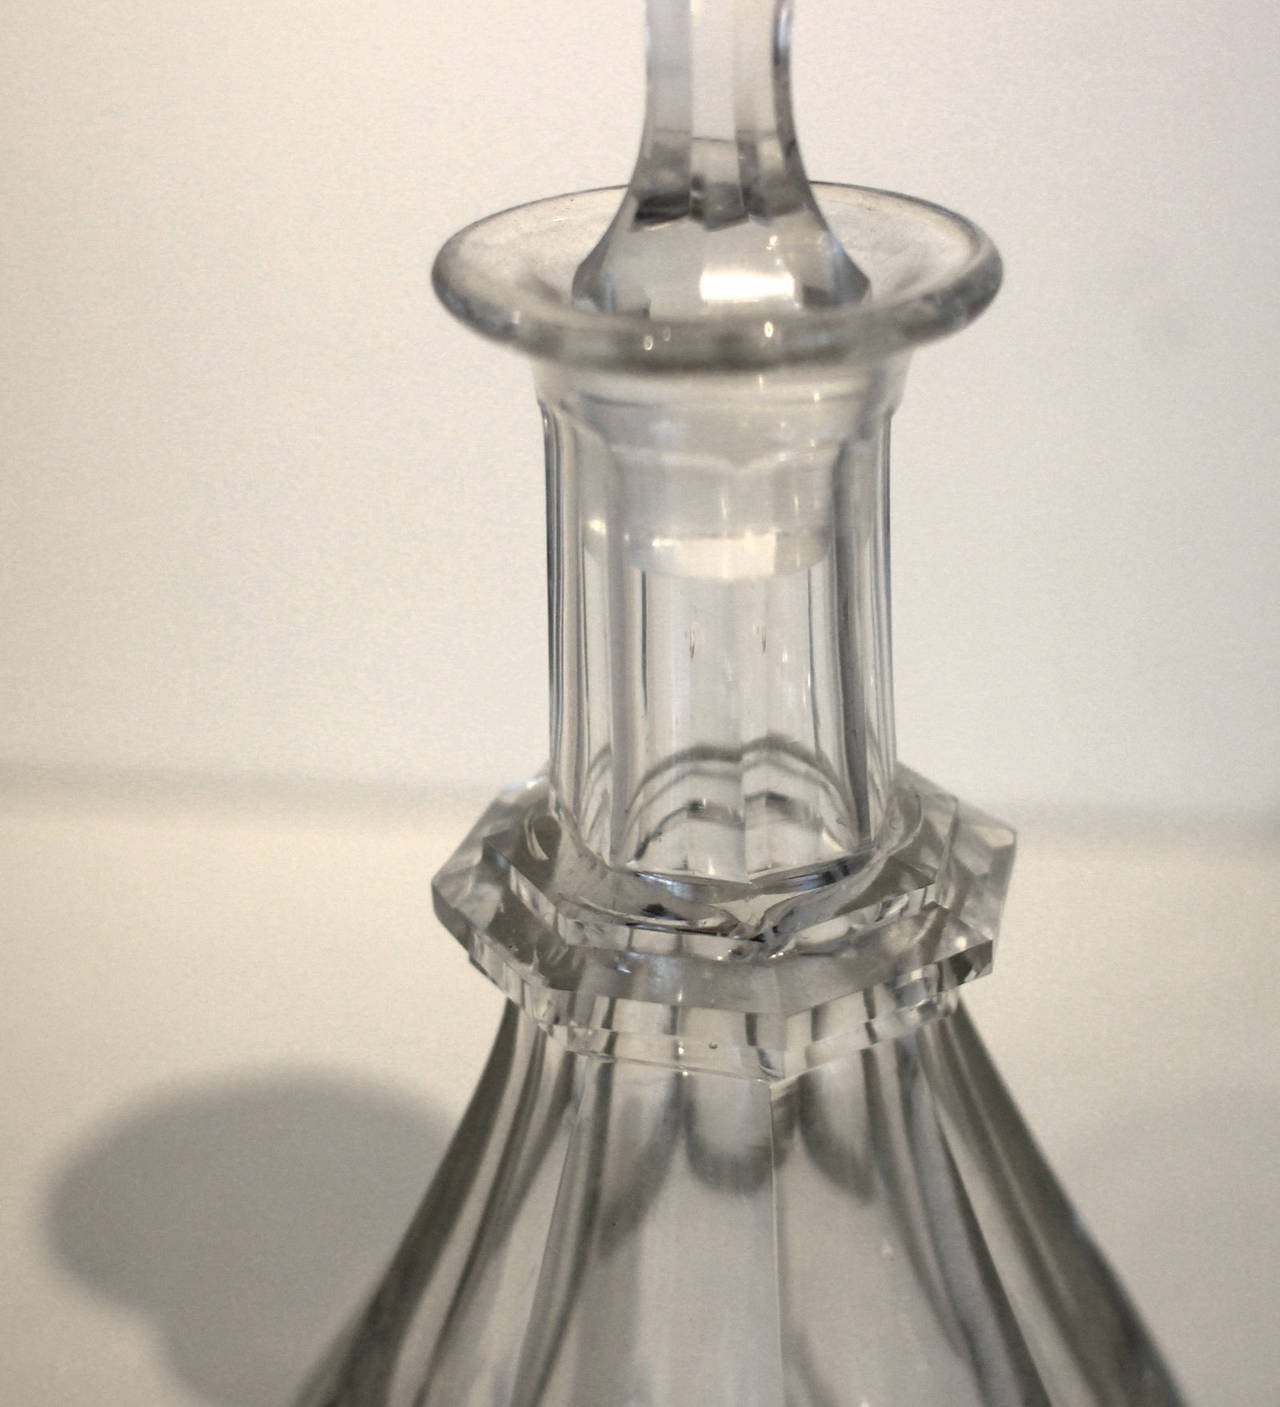 Fine cut glass decanter with an unusually tall original stopper, also with cut decoration. Probably American, 19th century. Excellent condition.